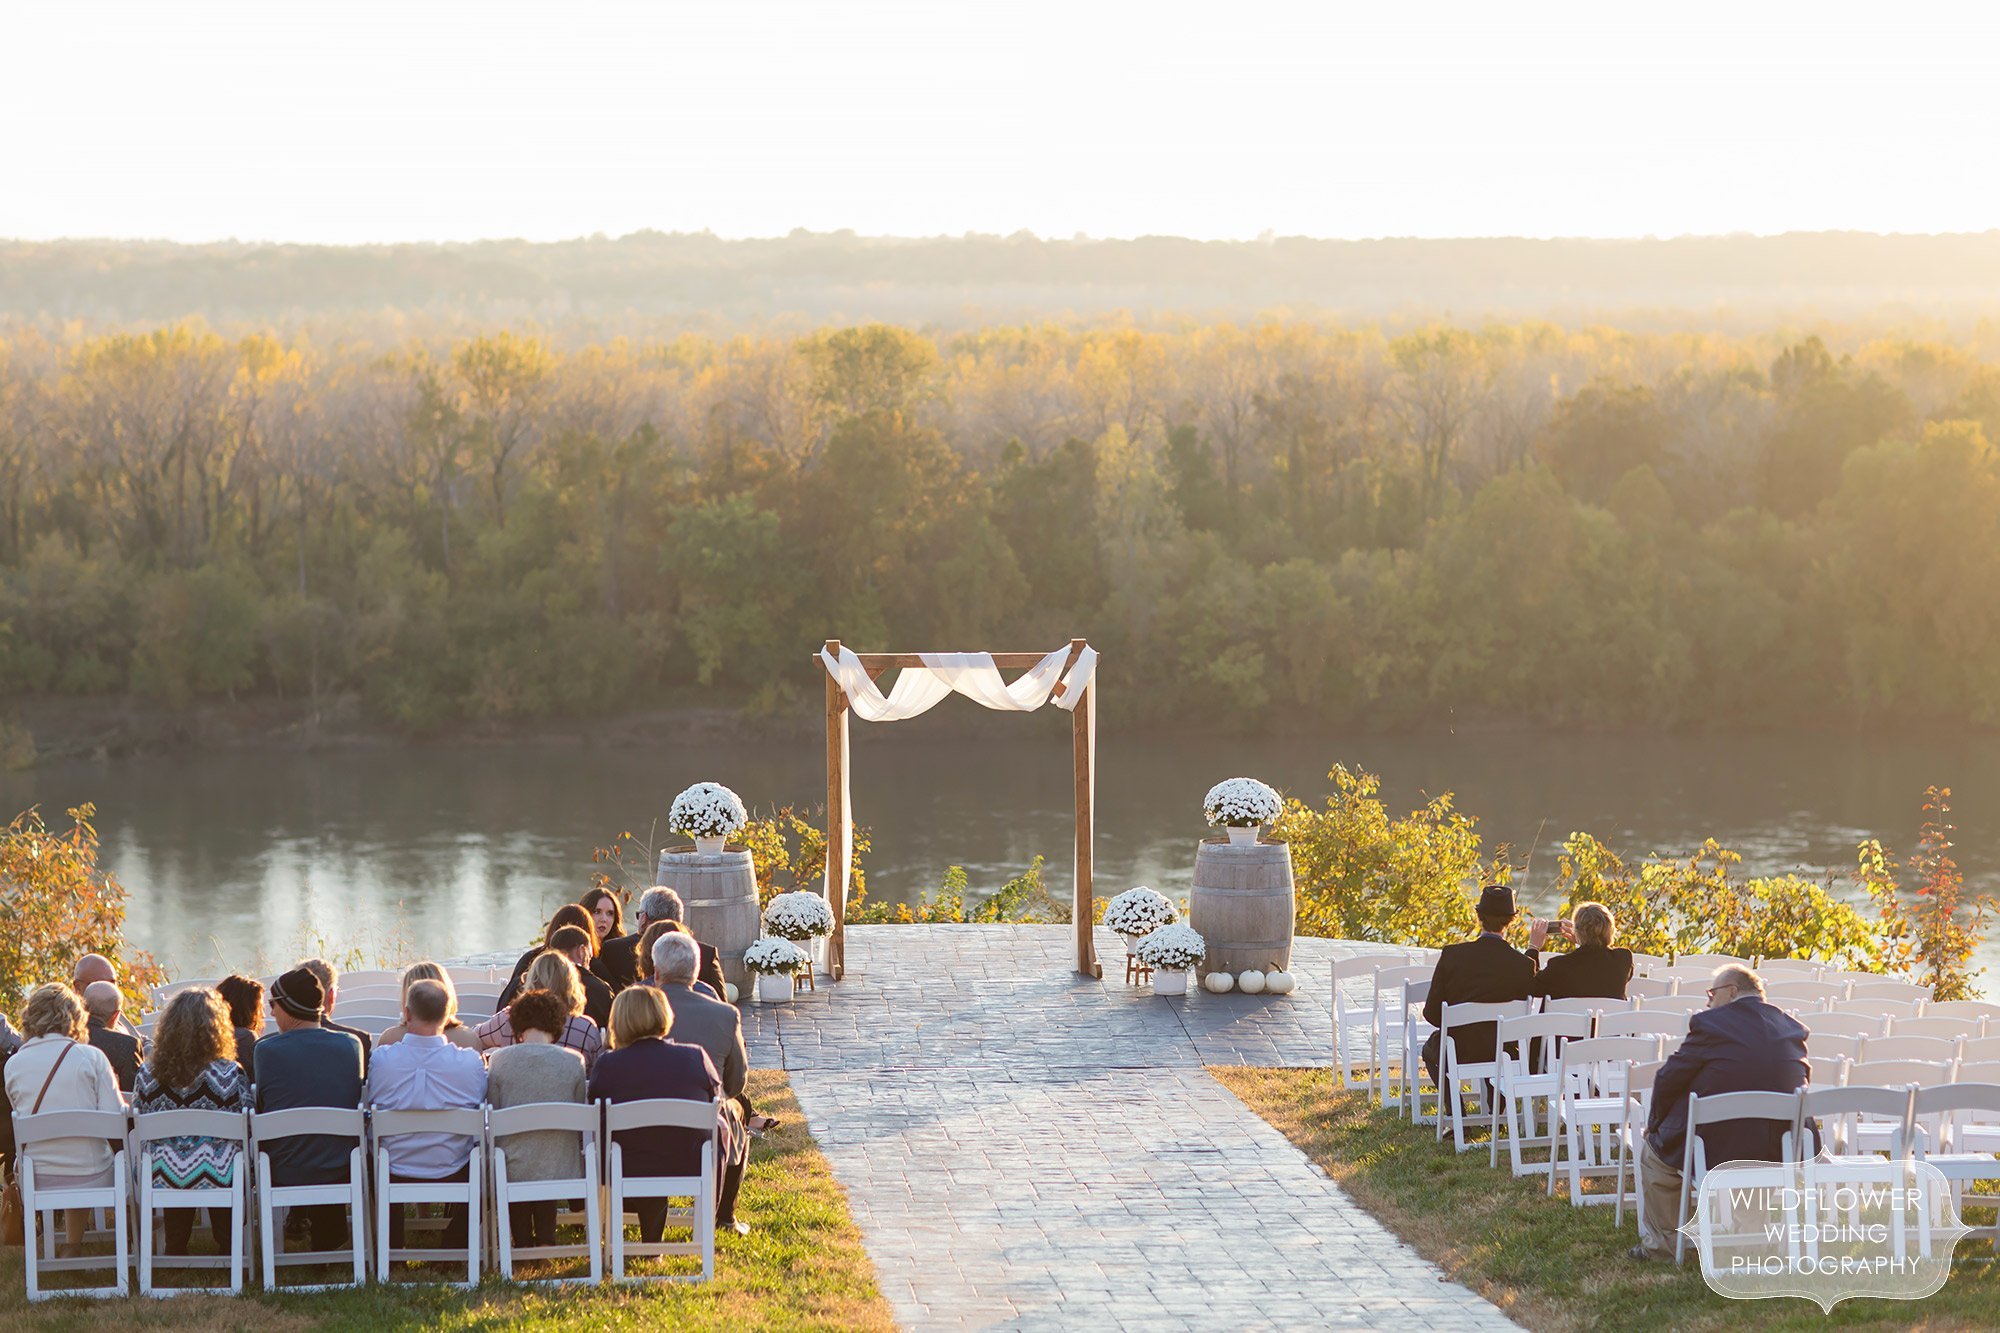 Outdoor ceremony space on the blufftop overlooking the river at Les Bourgeois WInery.